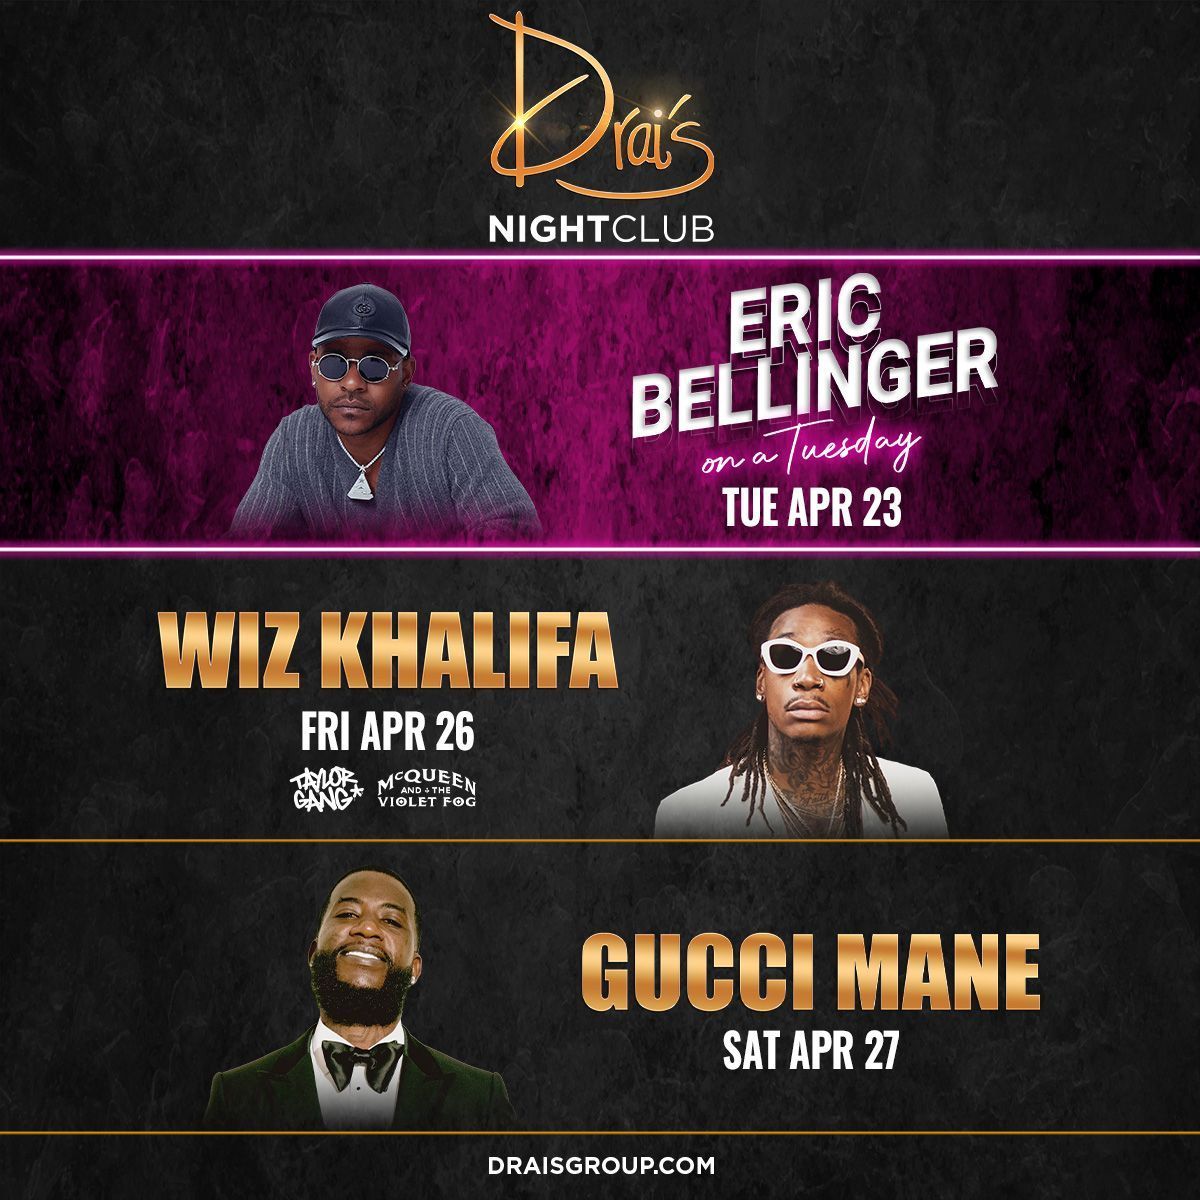 Get ready for another LIT week! Don't miss out, grab your tickets now at buff.ly/49sLSpR 🎫 ✨ Tue - Eric Bellinger Fri - Wiz Khalifa Sat - Gucci Mane #OnlyatDrais